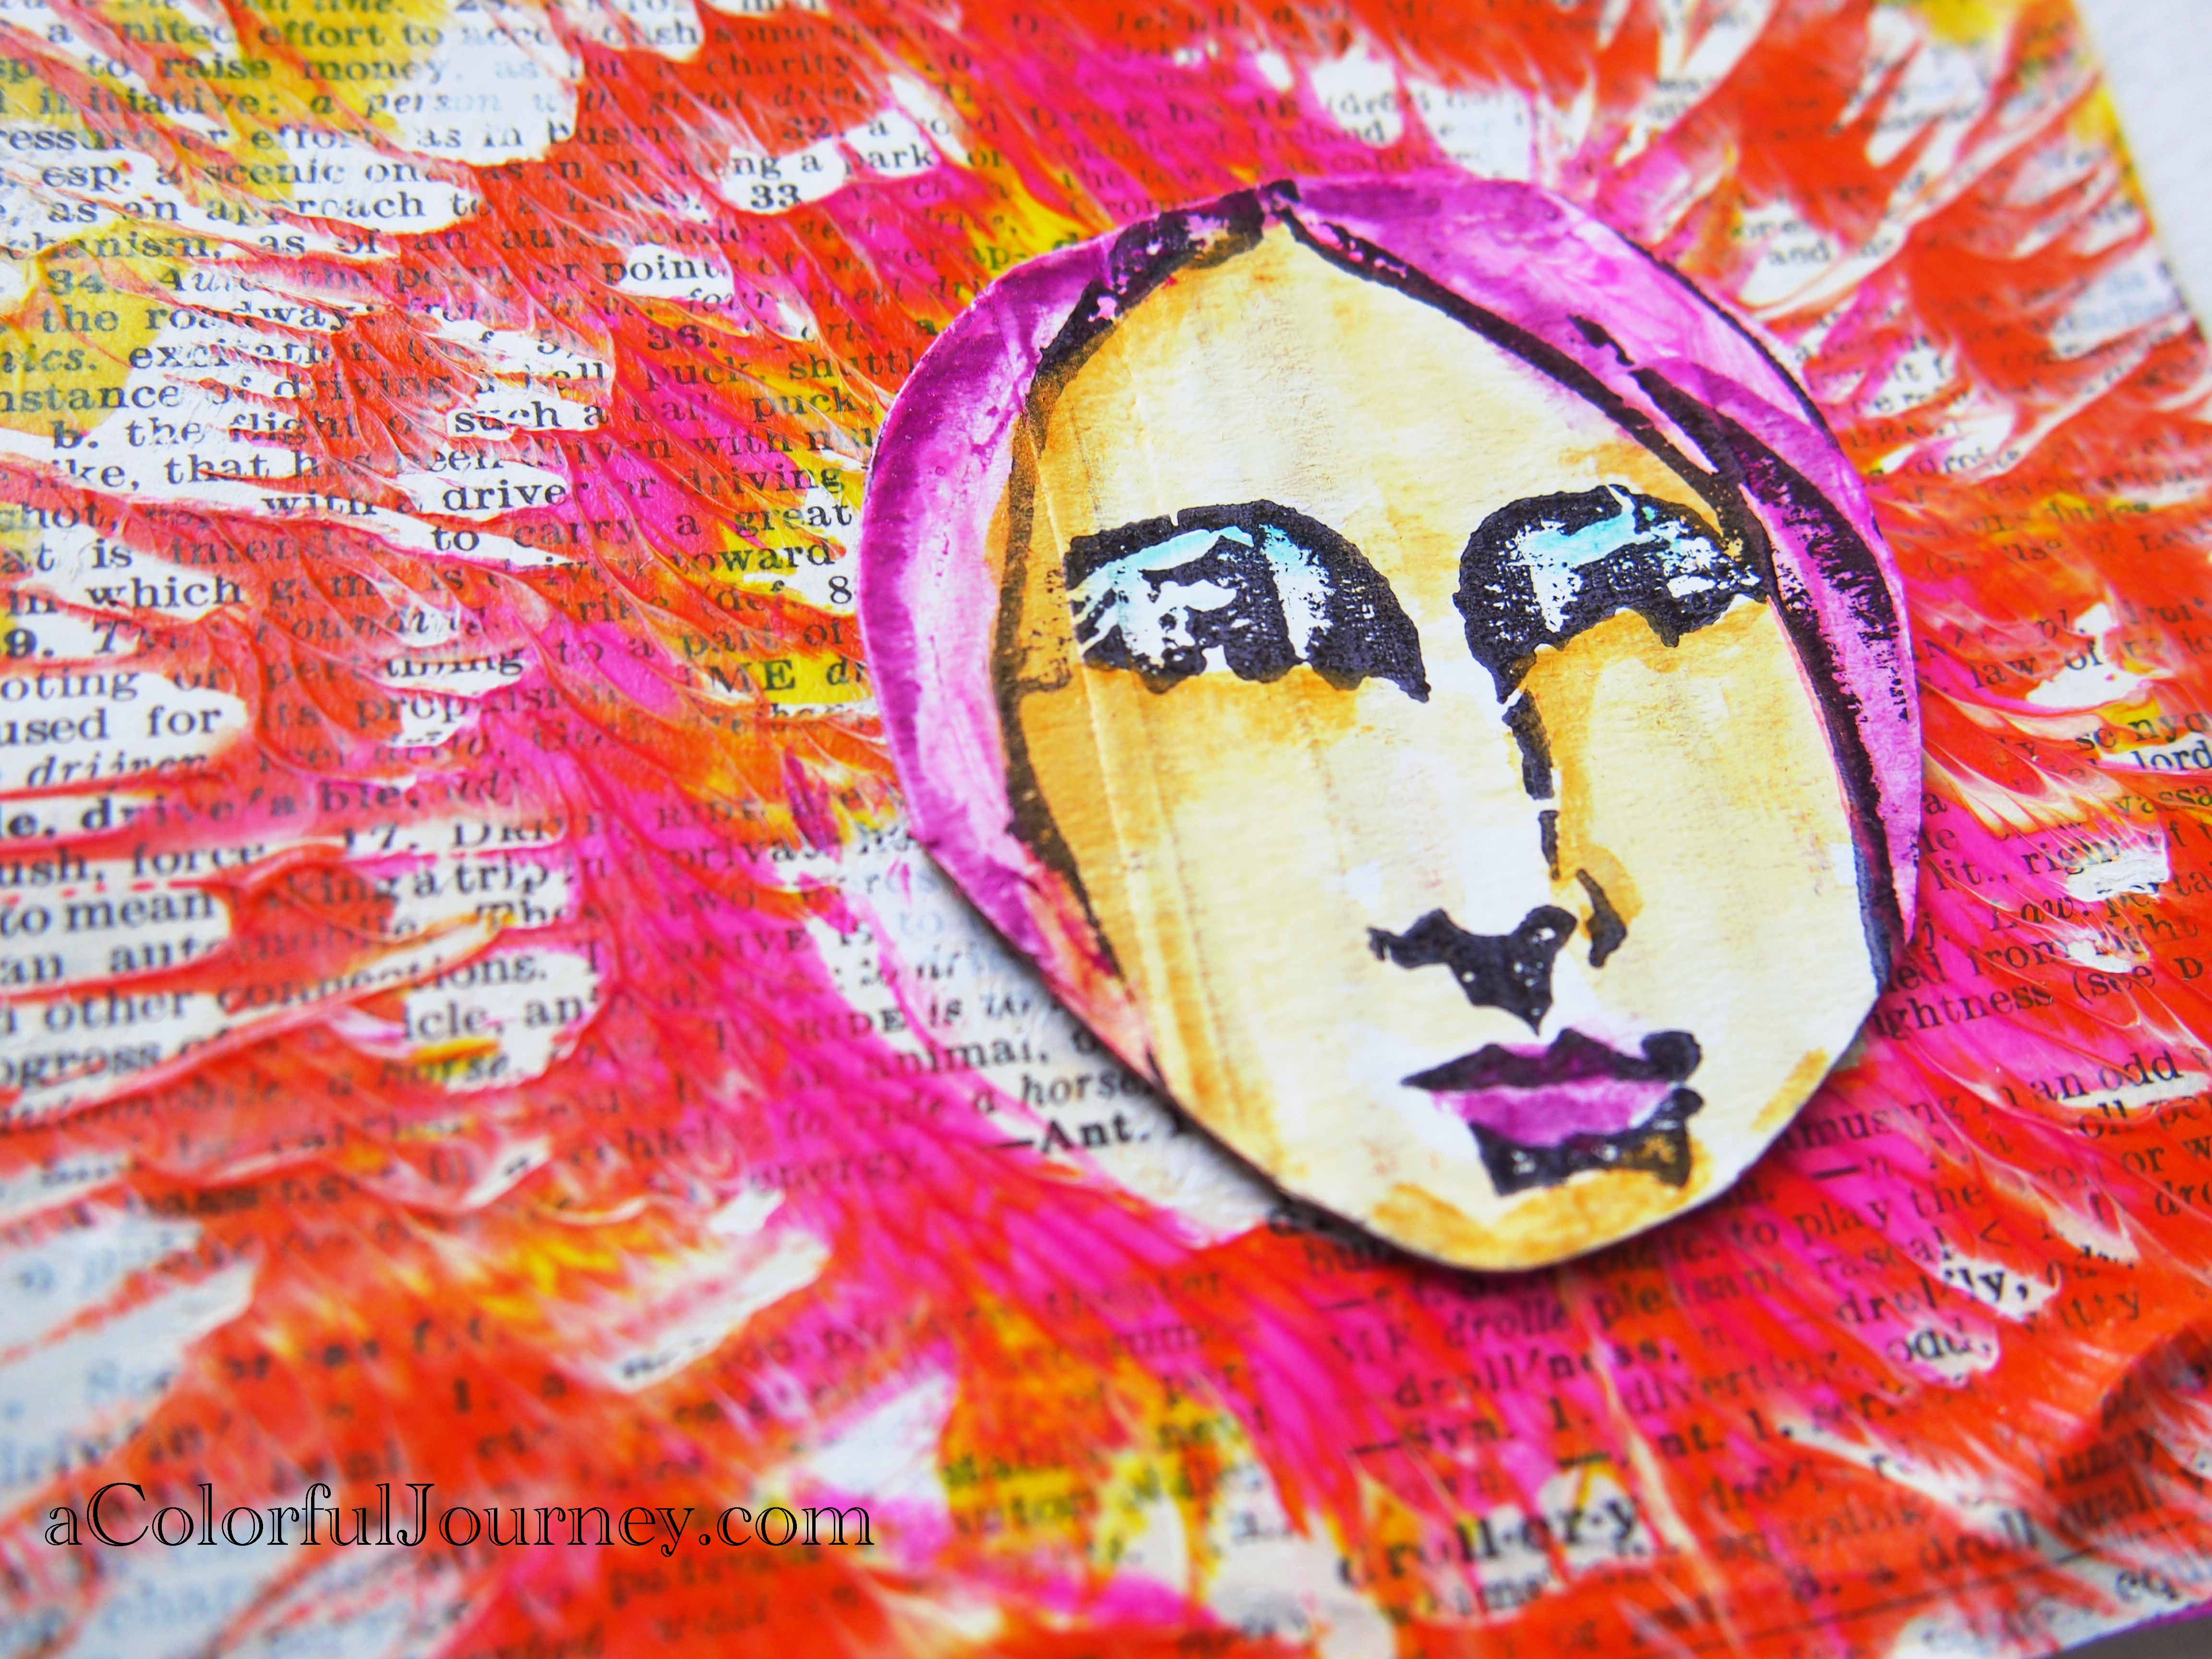 A Gelli Plate Print Tutorial: Why Dirty Plates are Awesome